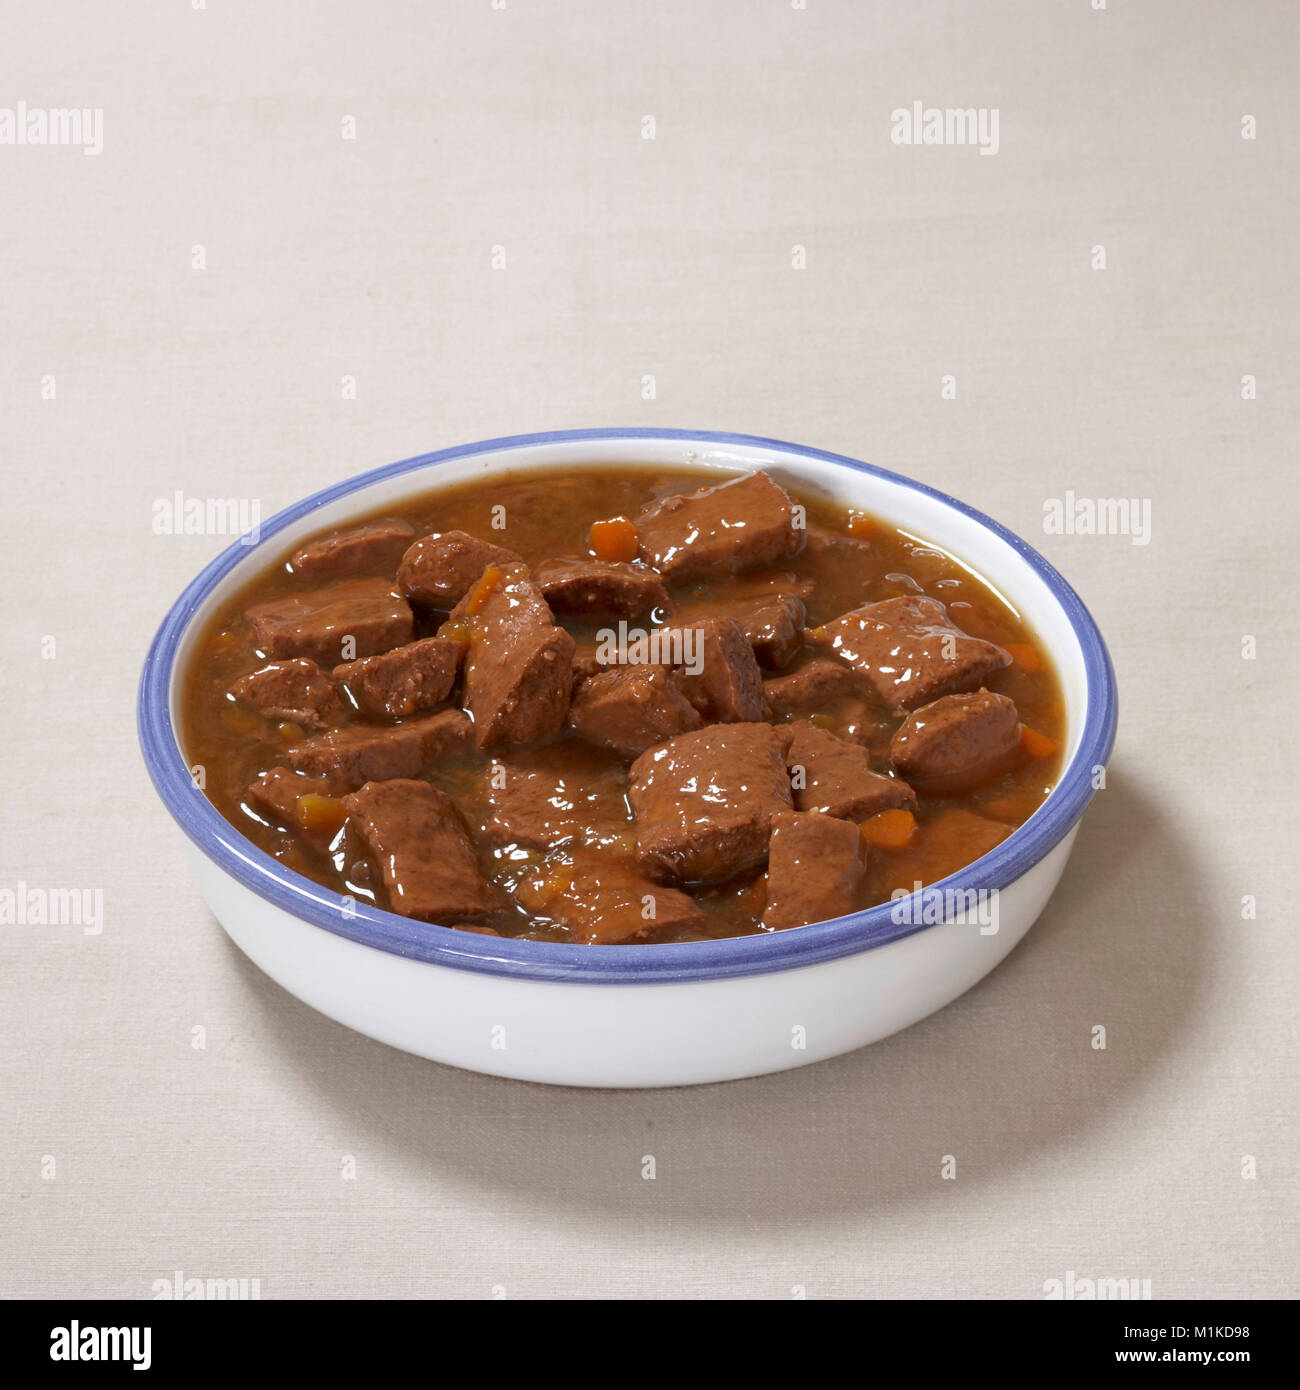 Domestic dog. Food bowl filled with moist feed seen against a white background Germany Stock Photo